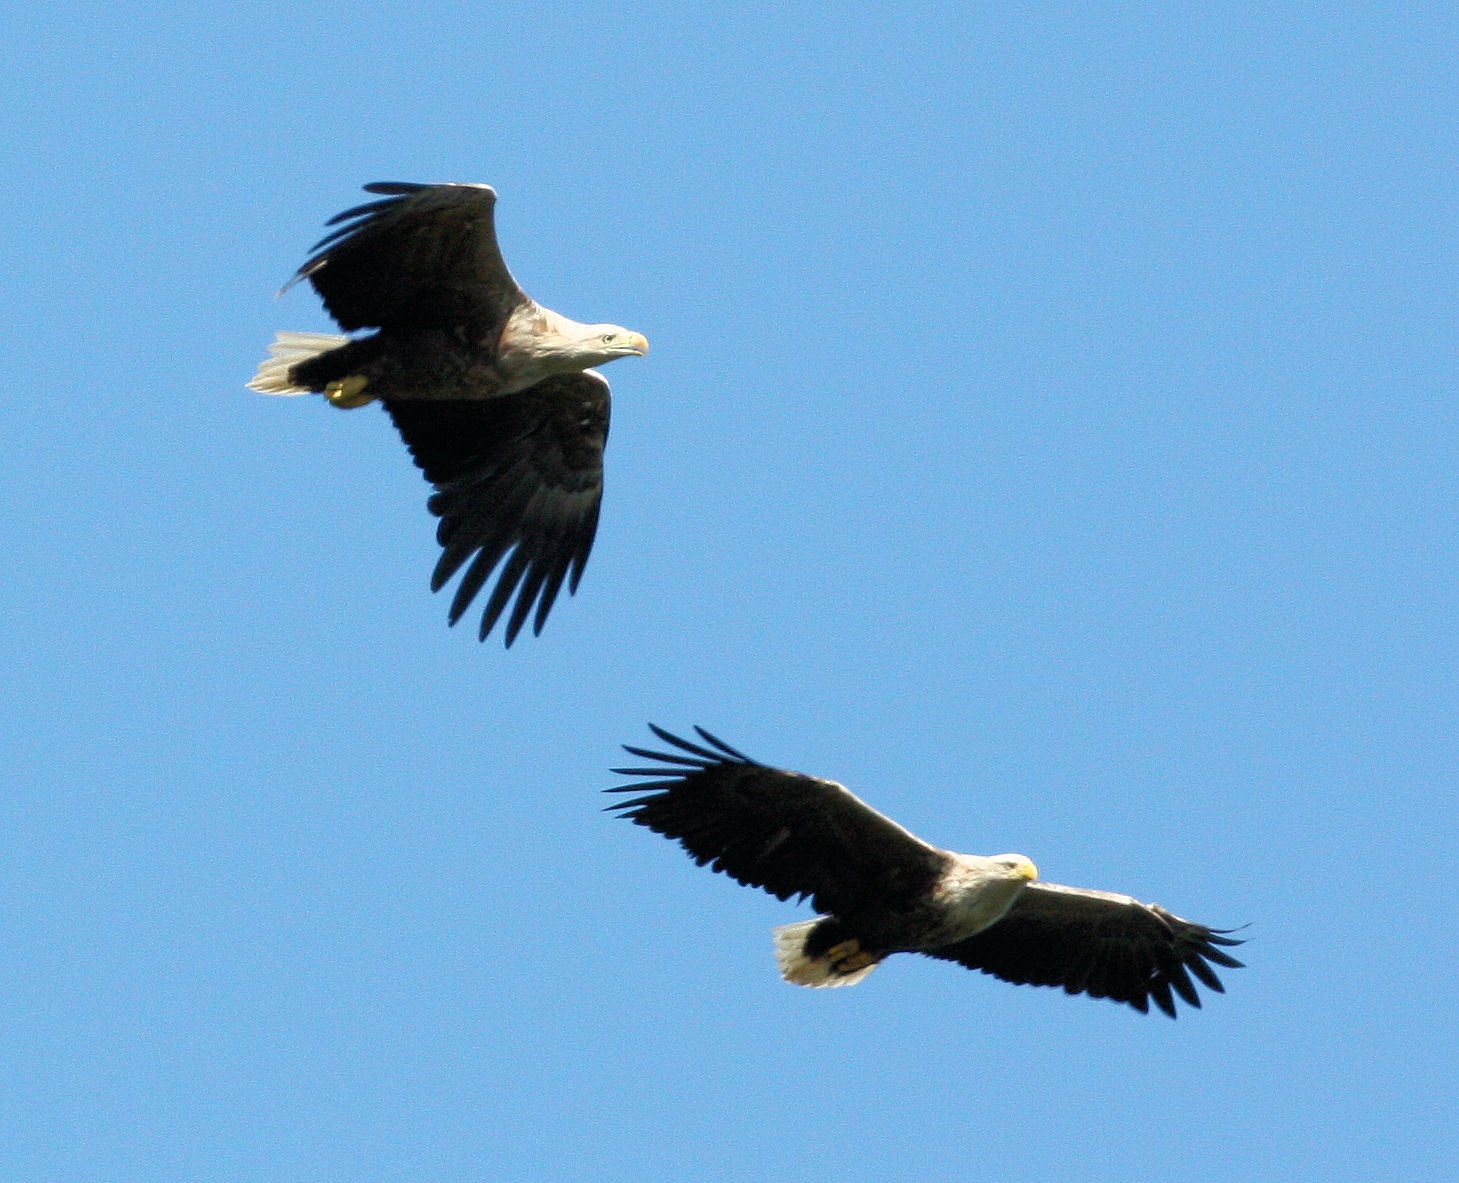 Tours to see Mull's golden eagles will begin on Monday